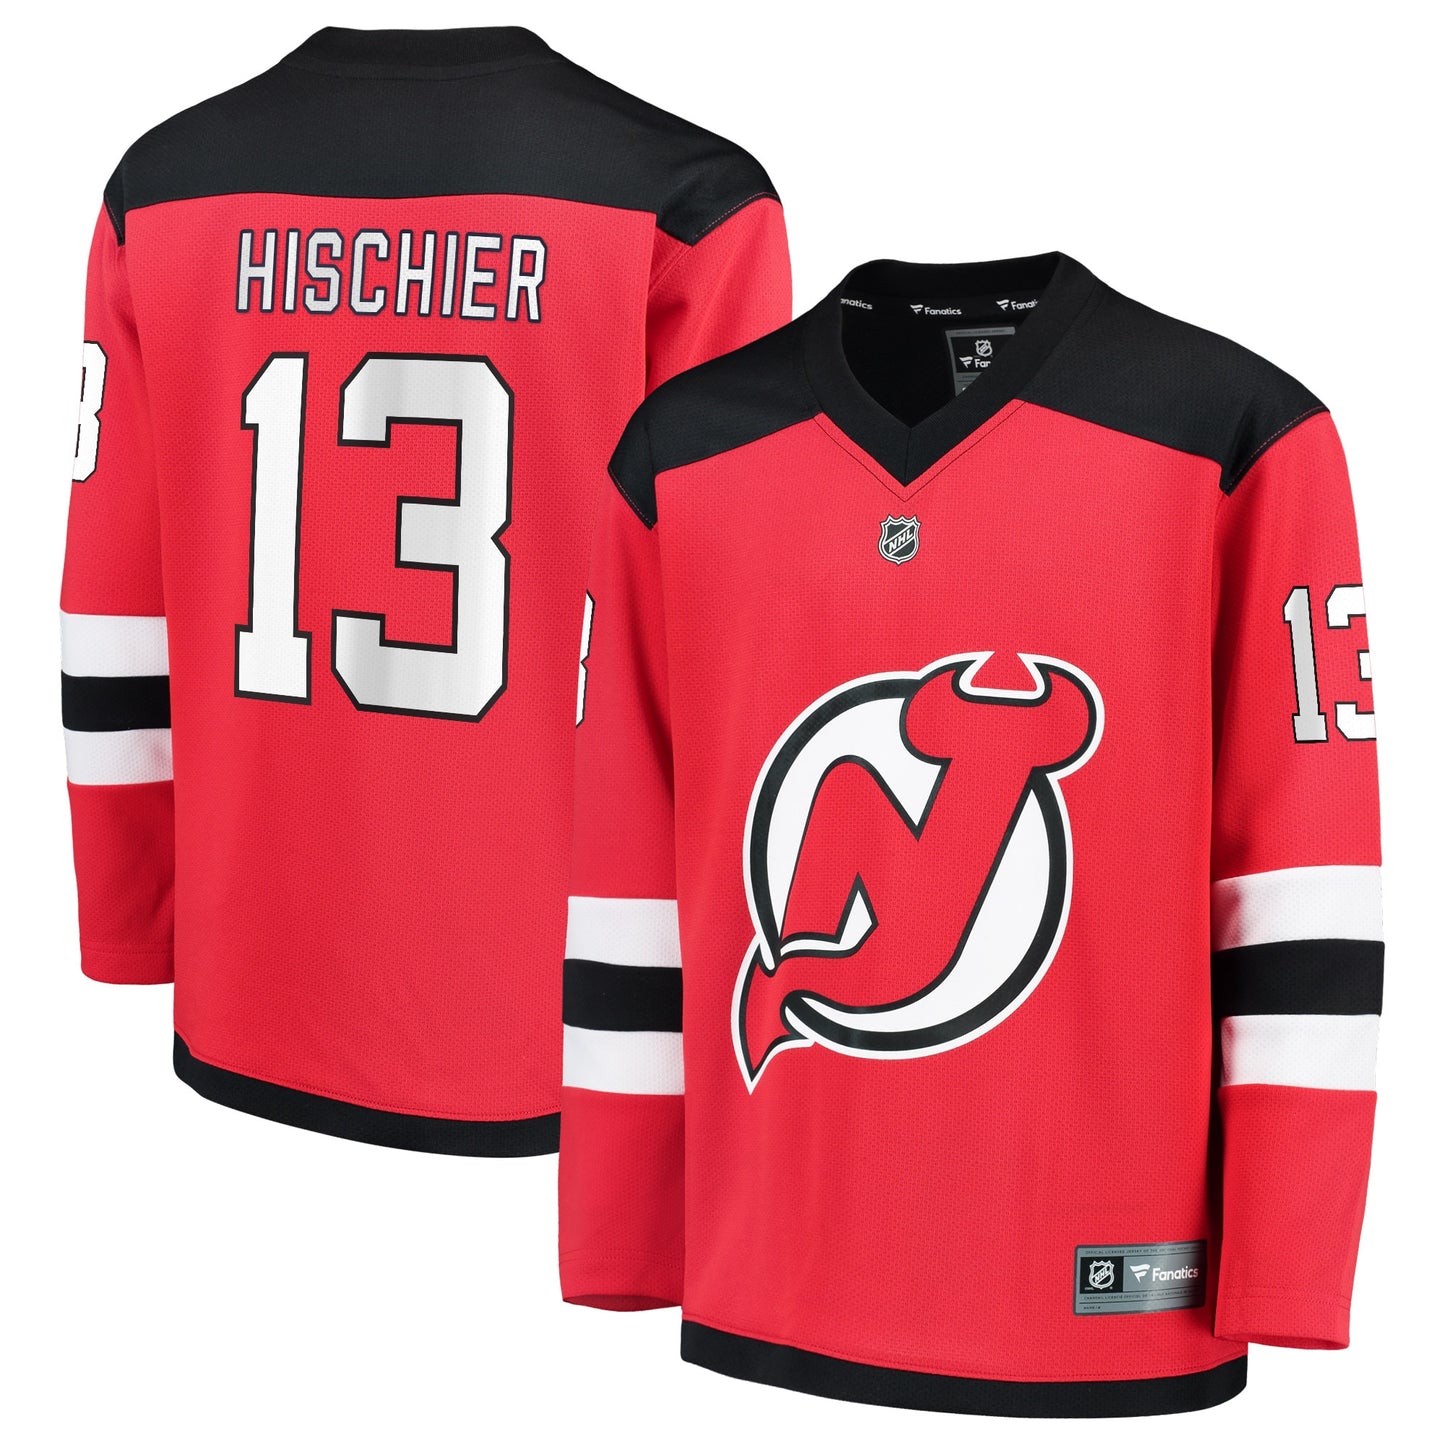 Nico Hischier New Jersey Devils Fanatics Branded Youth Replica Player Jersey - Red